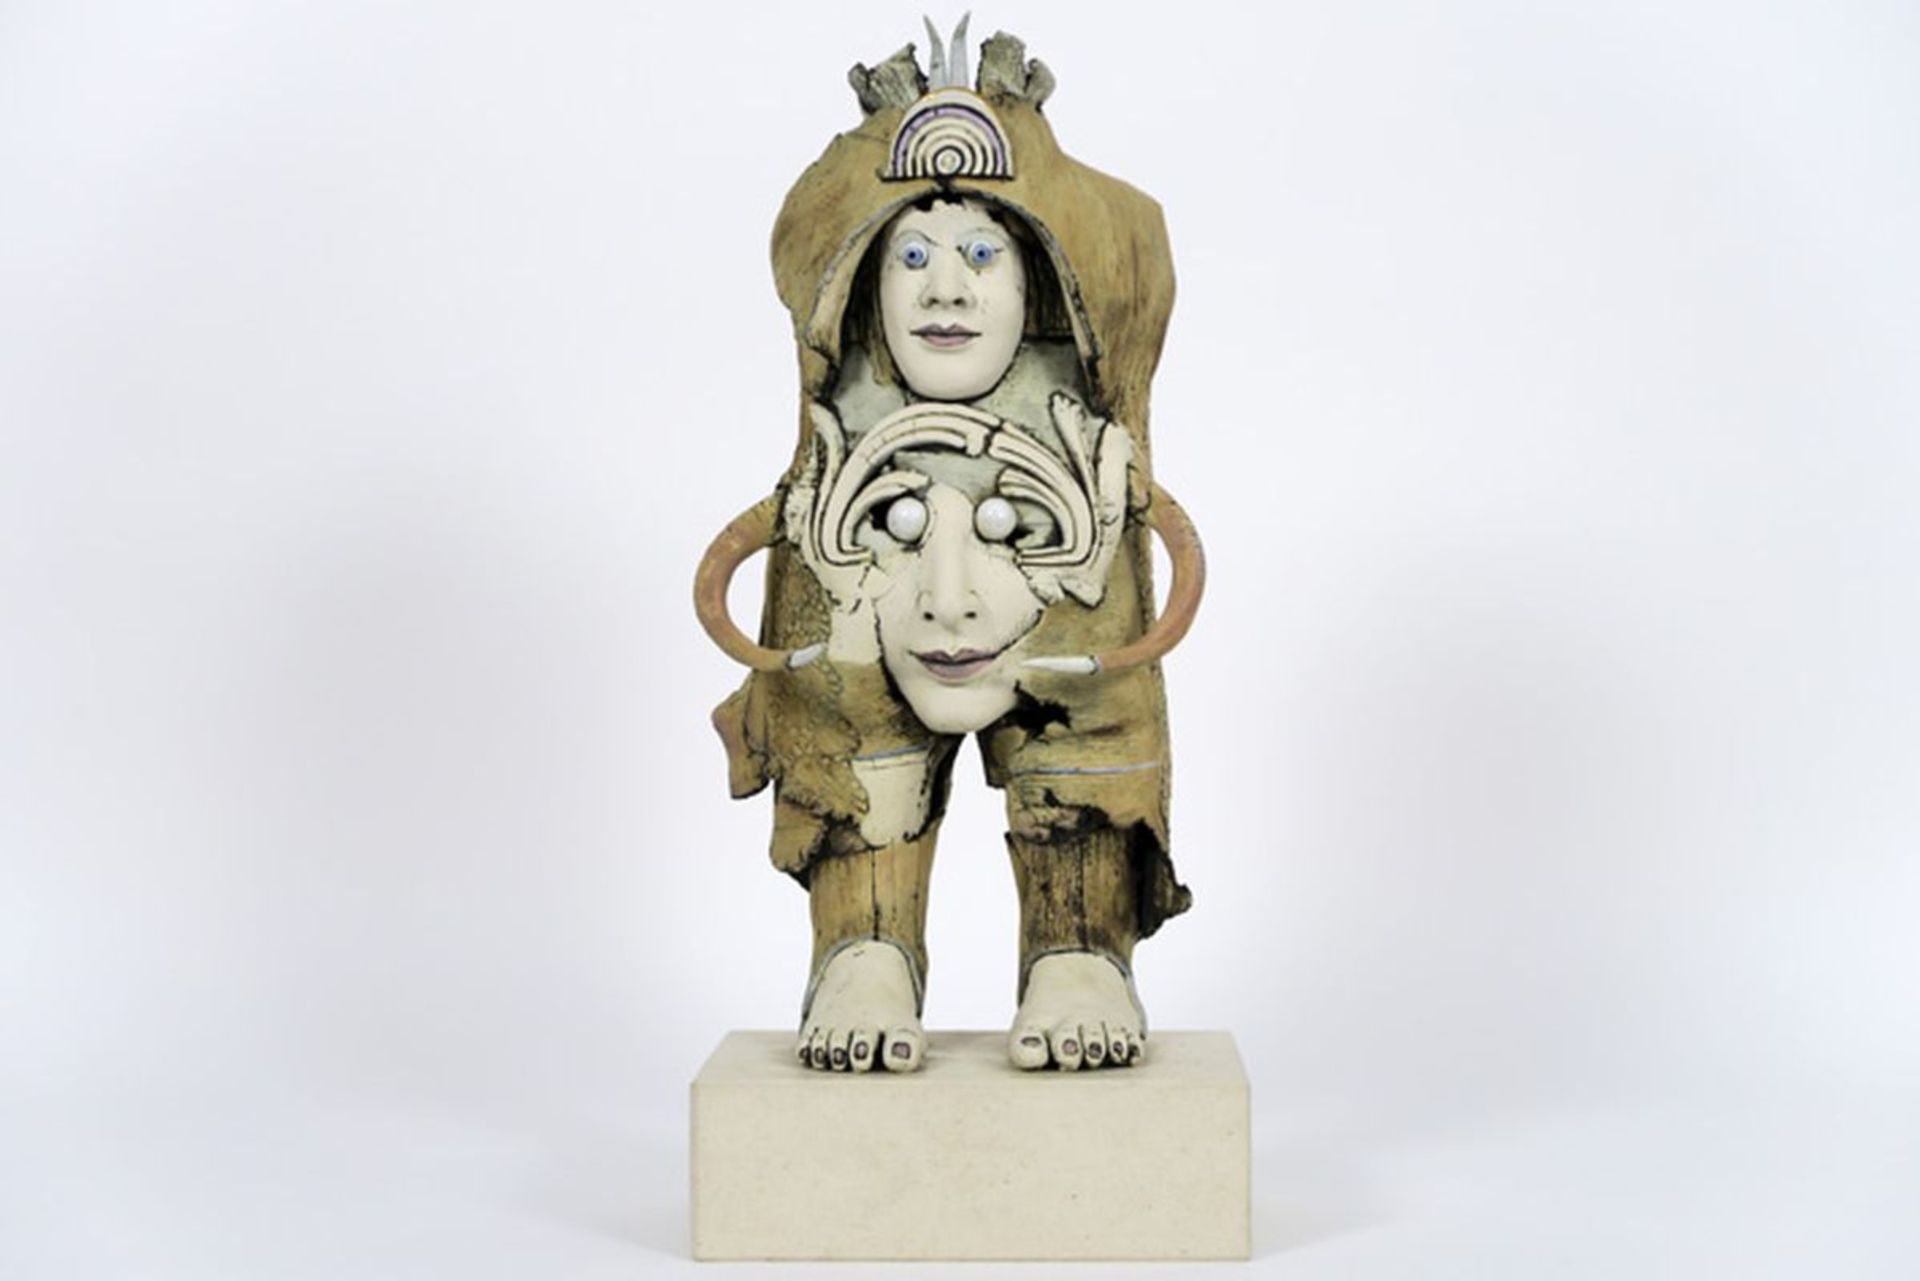 20th Cent. Belgian ceramic "sitting figure" sculpture - signed Walter De Rycke and [...]